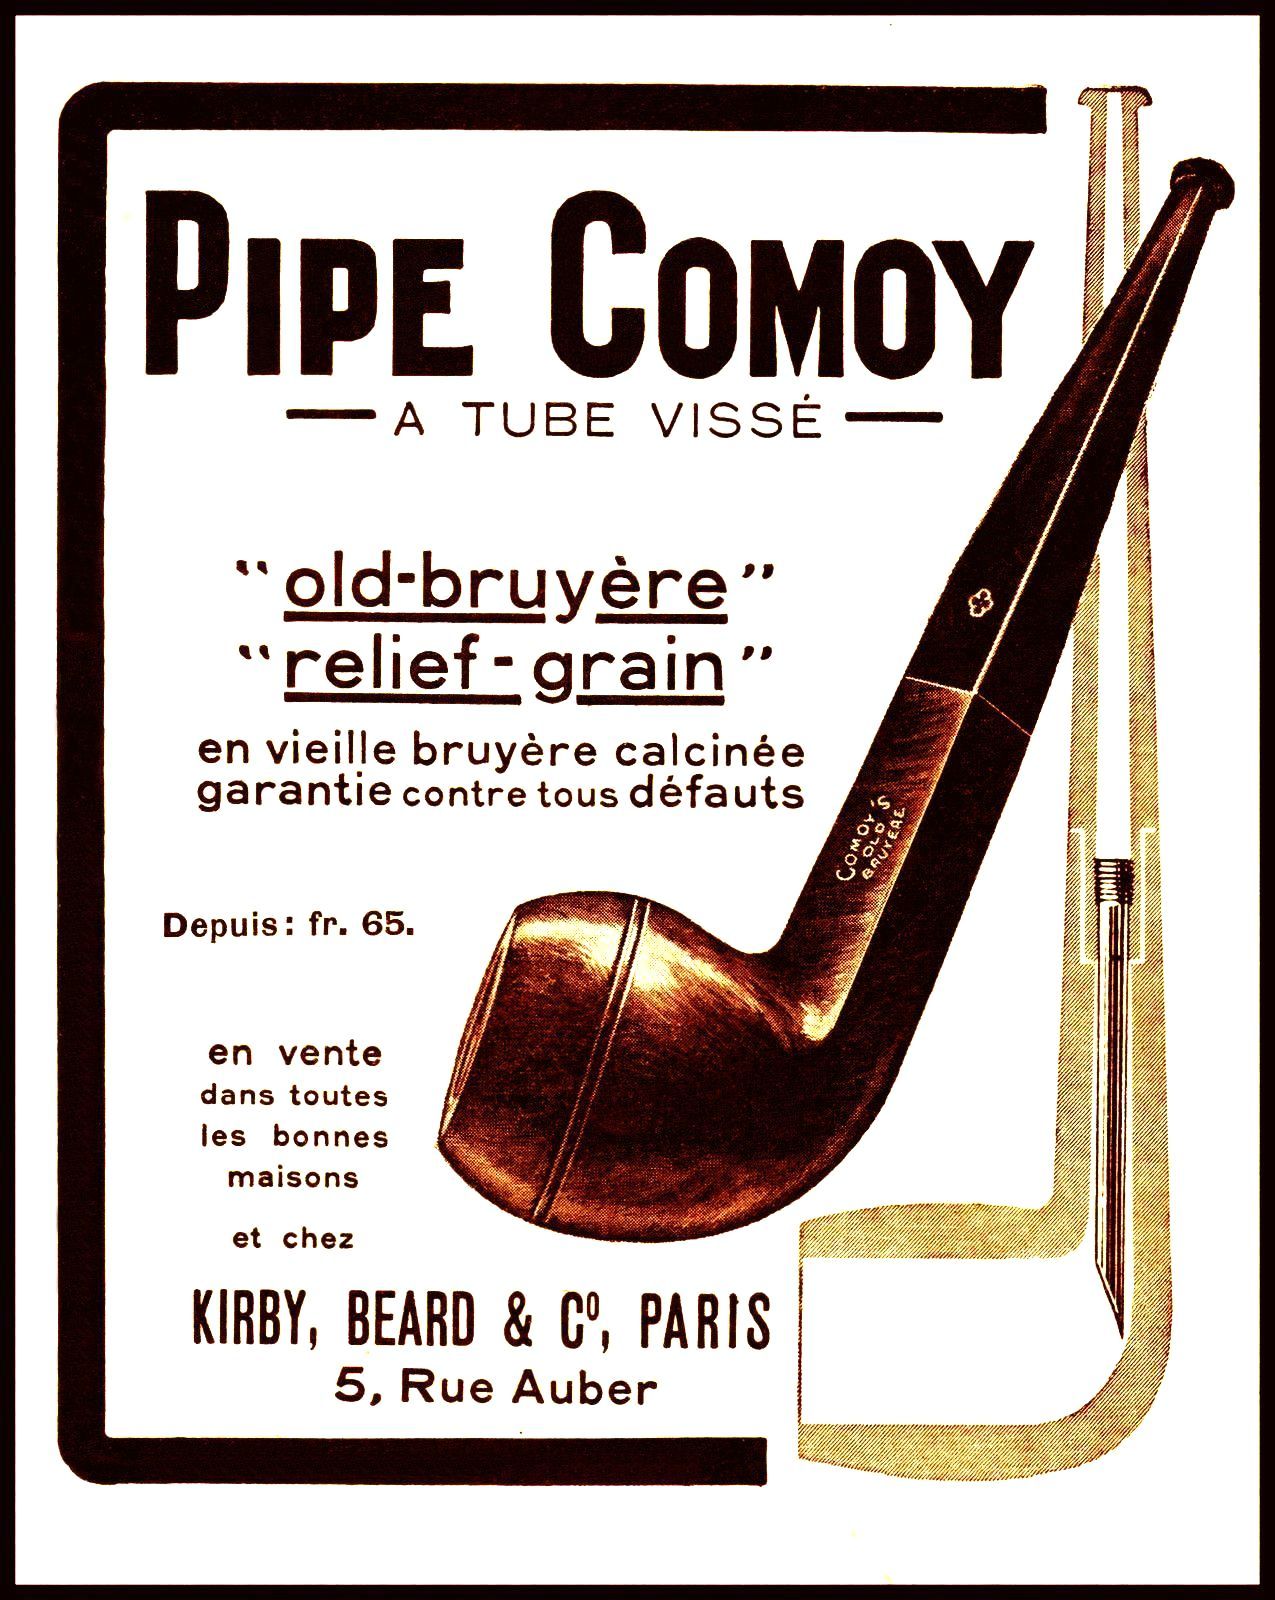 What kind of pipe is the comoy celebration?